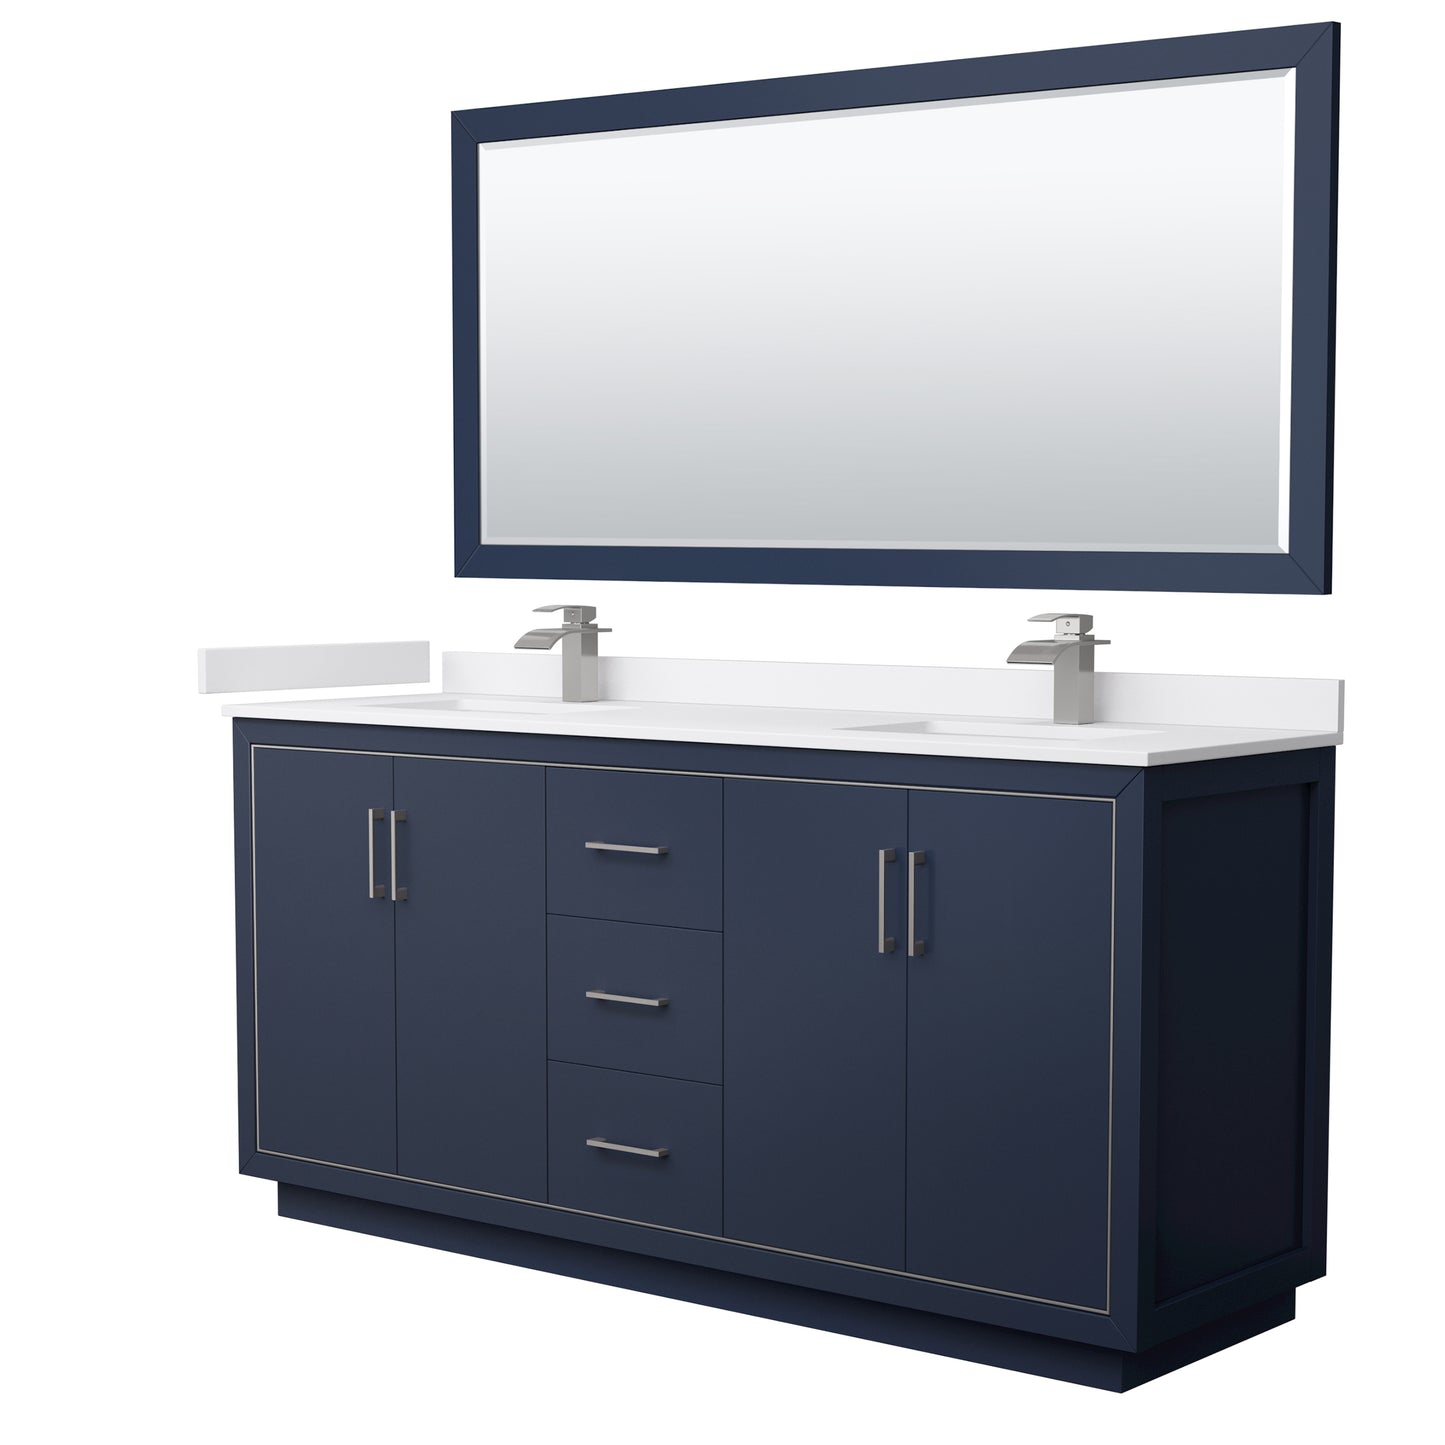 Wyndham Icon 72 Inch Double Bathroom Vanity White Cultured Marble Countertop with Undermount Square Sinks, Brushed Nickel Trim and 70 Inch Mirror - Luxe Bathroom Vanities